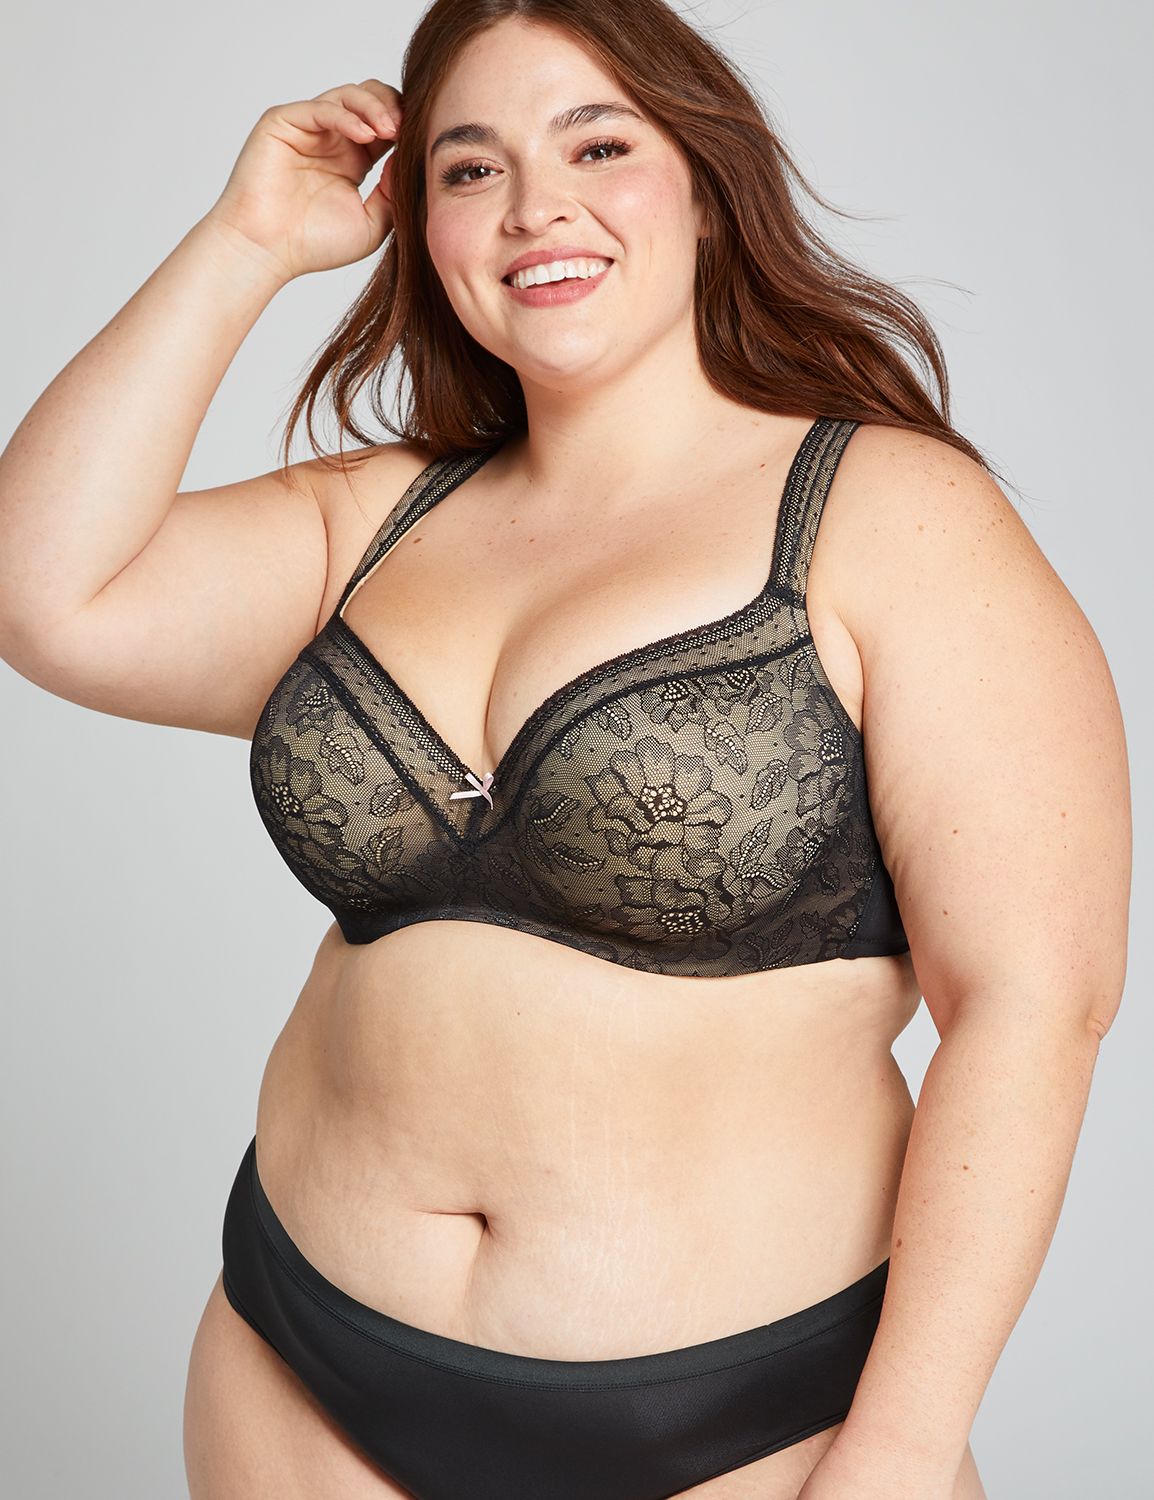 wife in lane bryant lingerie sex photo